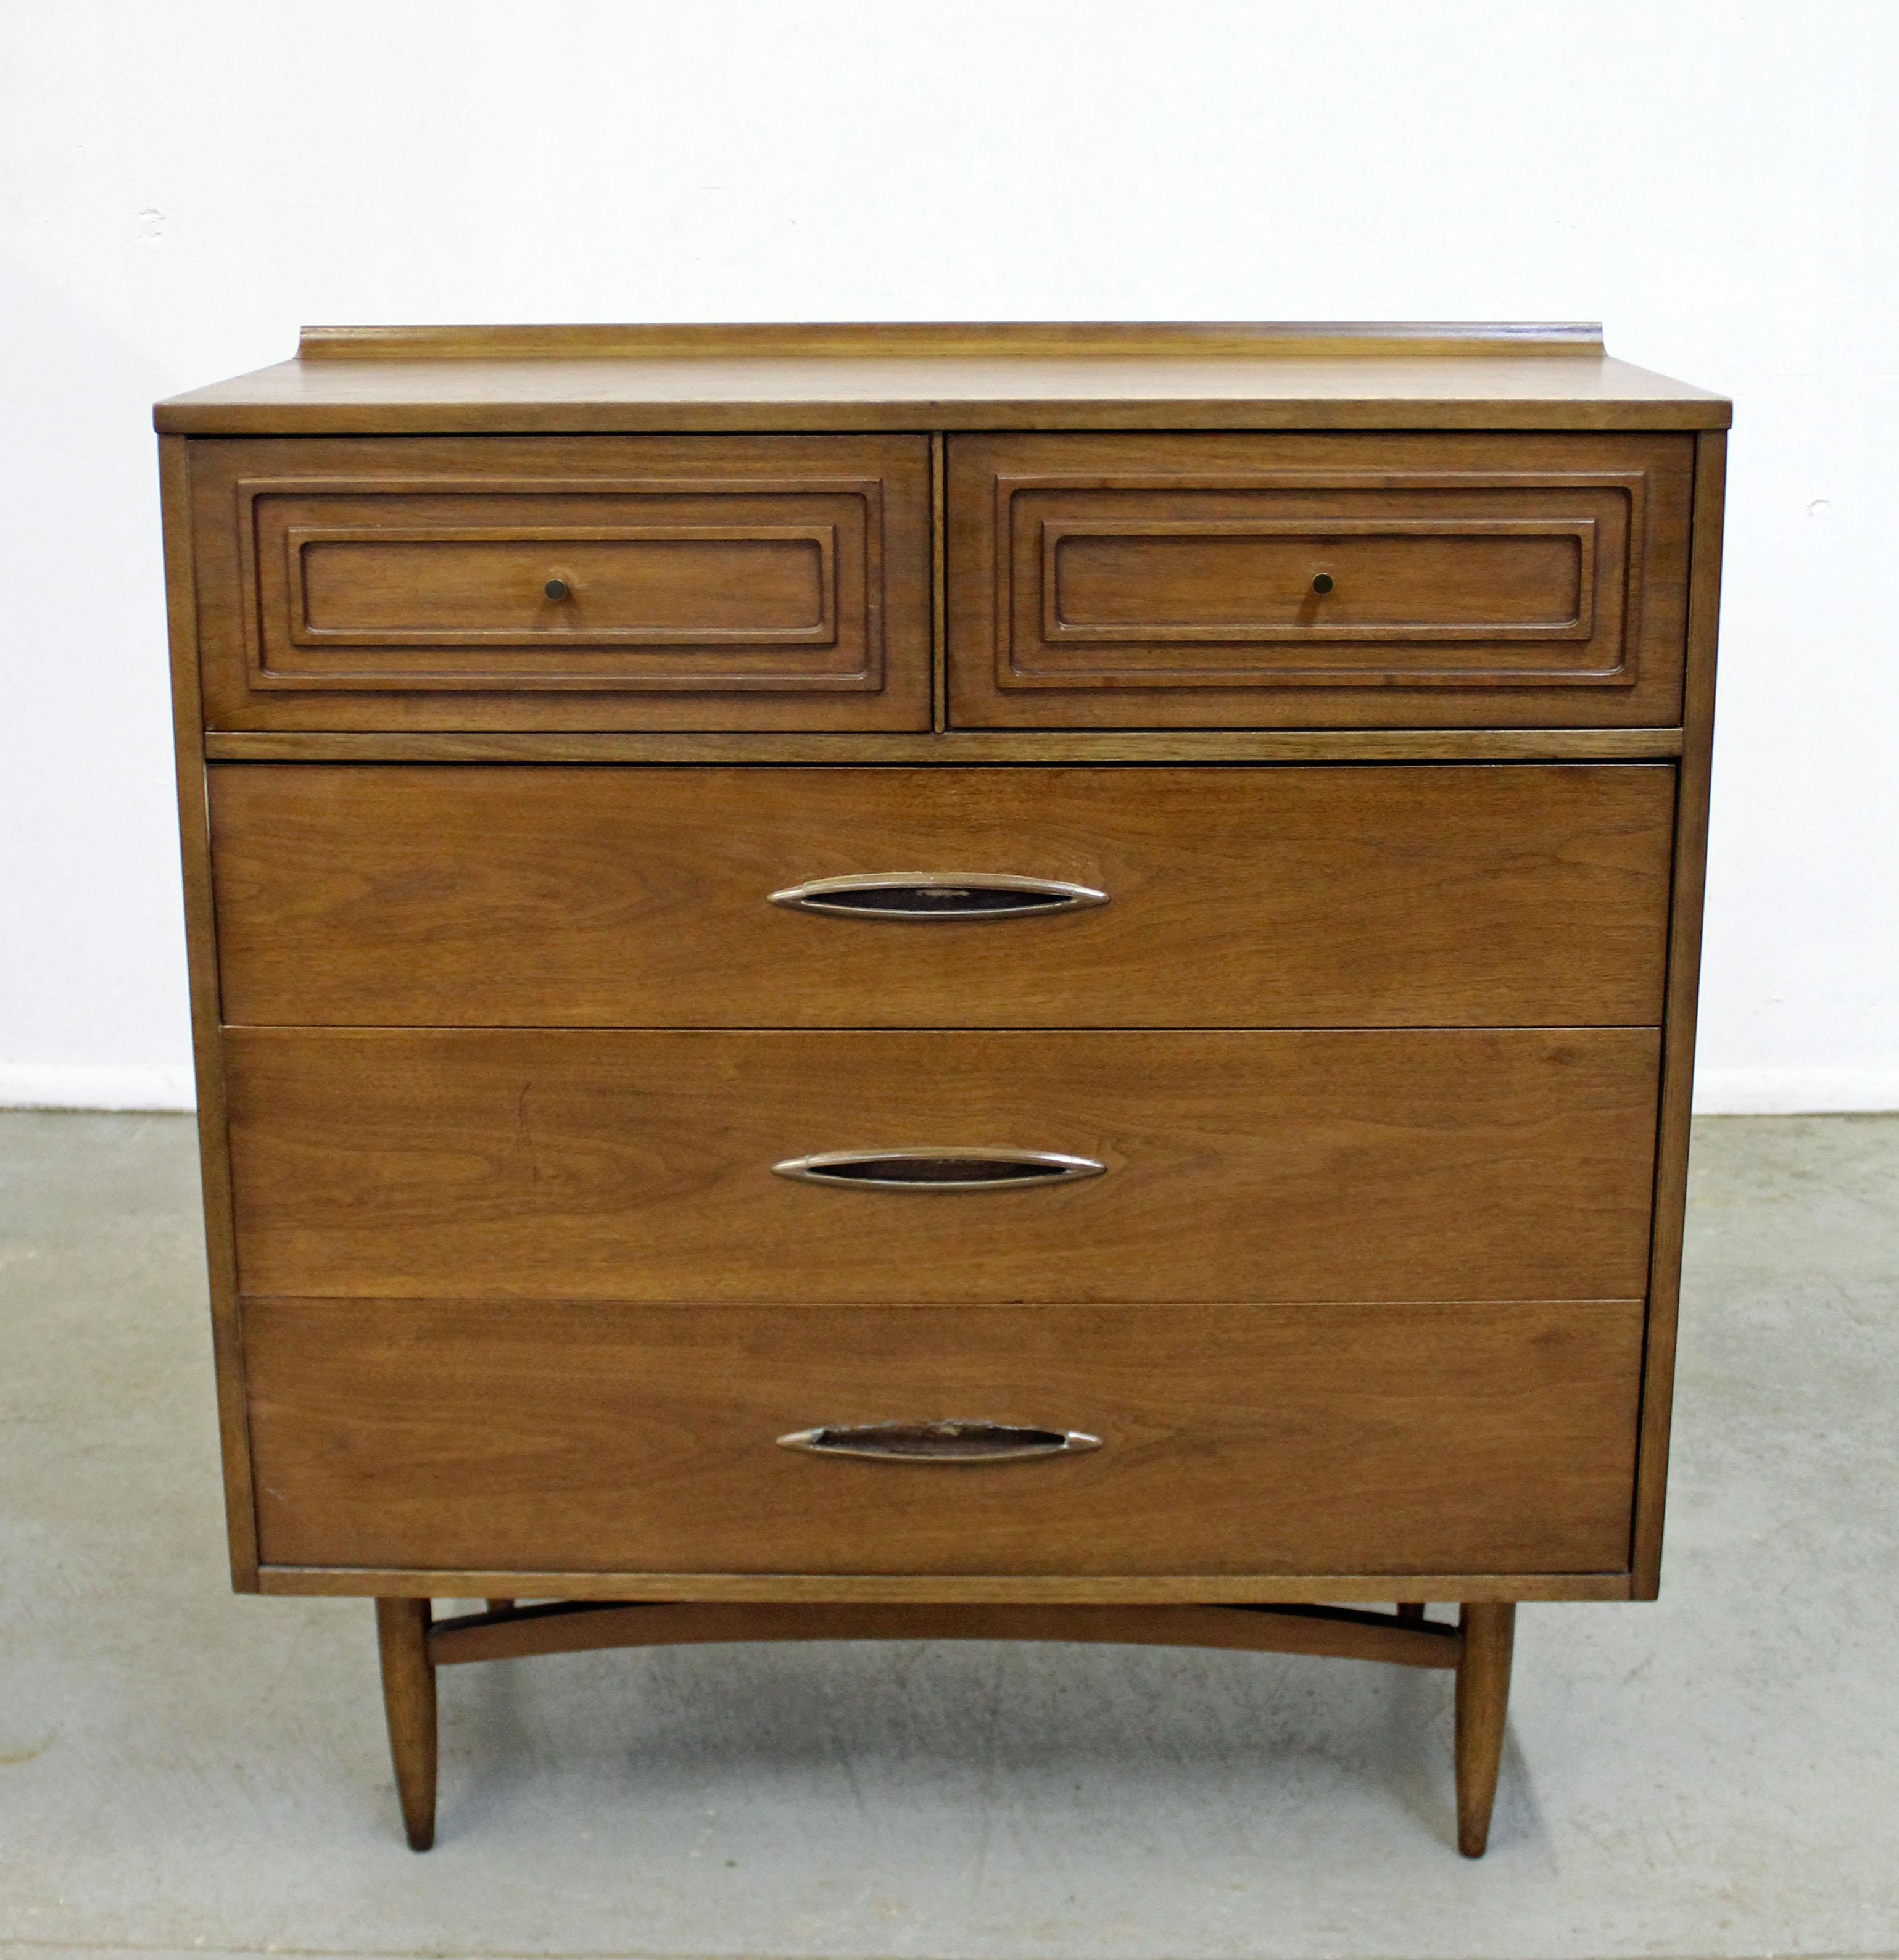 Offered is a walnut tall chest of drawers made for Broyhill Premier's 'Sculptra' line. Has 5 drawers - two small atop with rectangular framing on fronts and three large bottom drawers with faux wood metal pulls. Top large drawer also has a removable